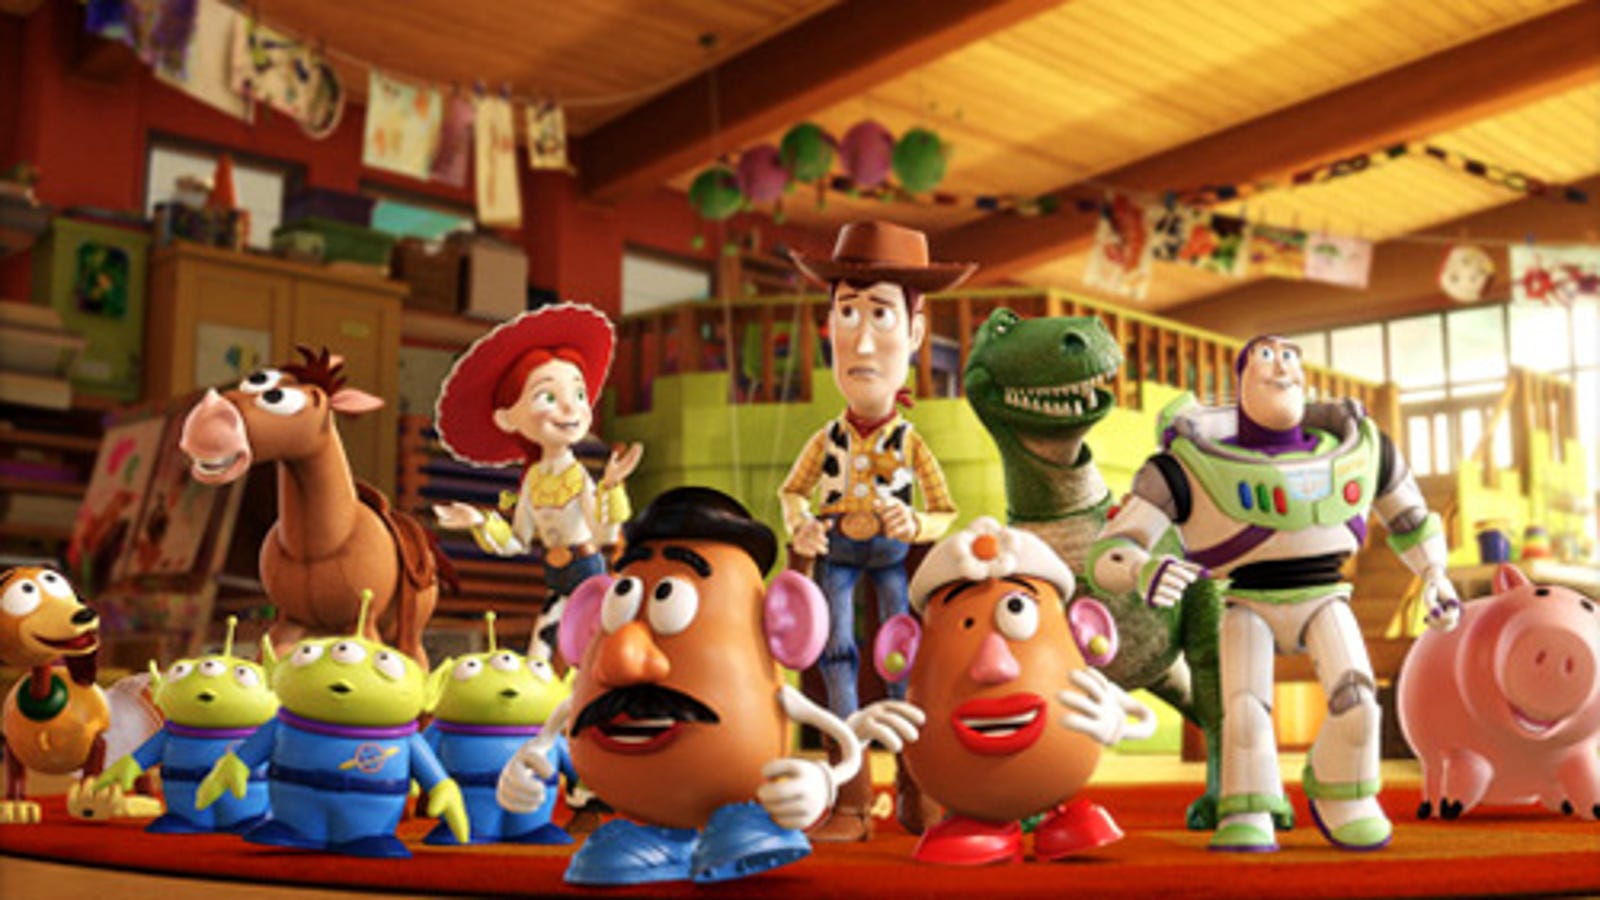 Toy Story 3 Movie Review: Childhood's End